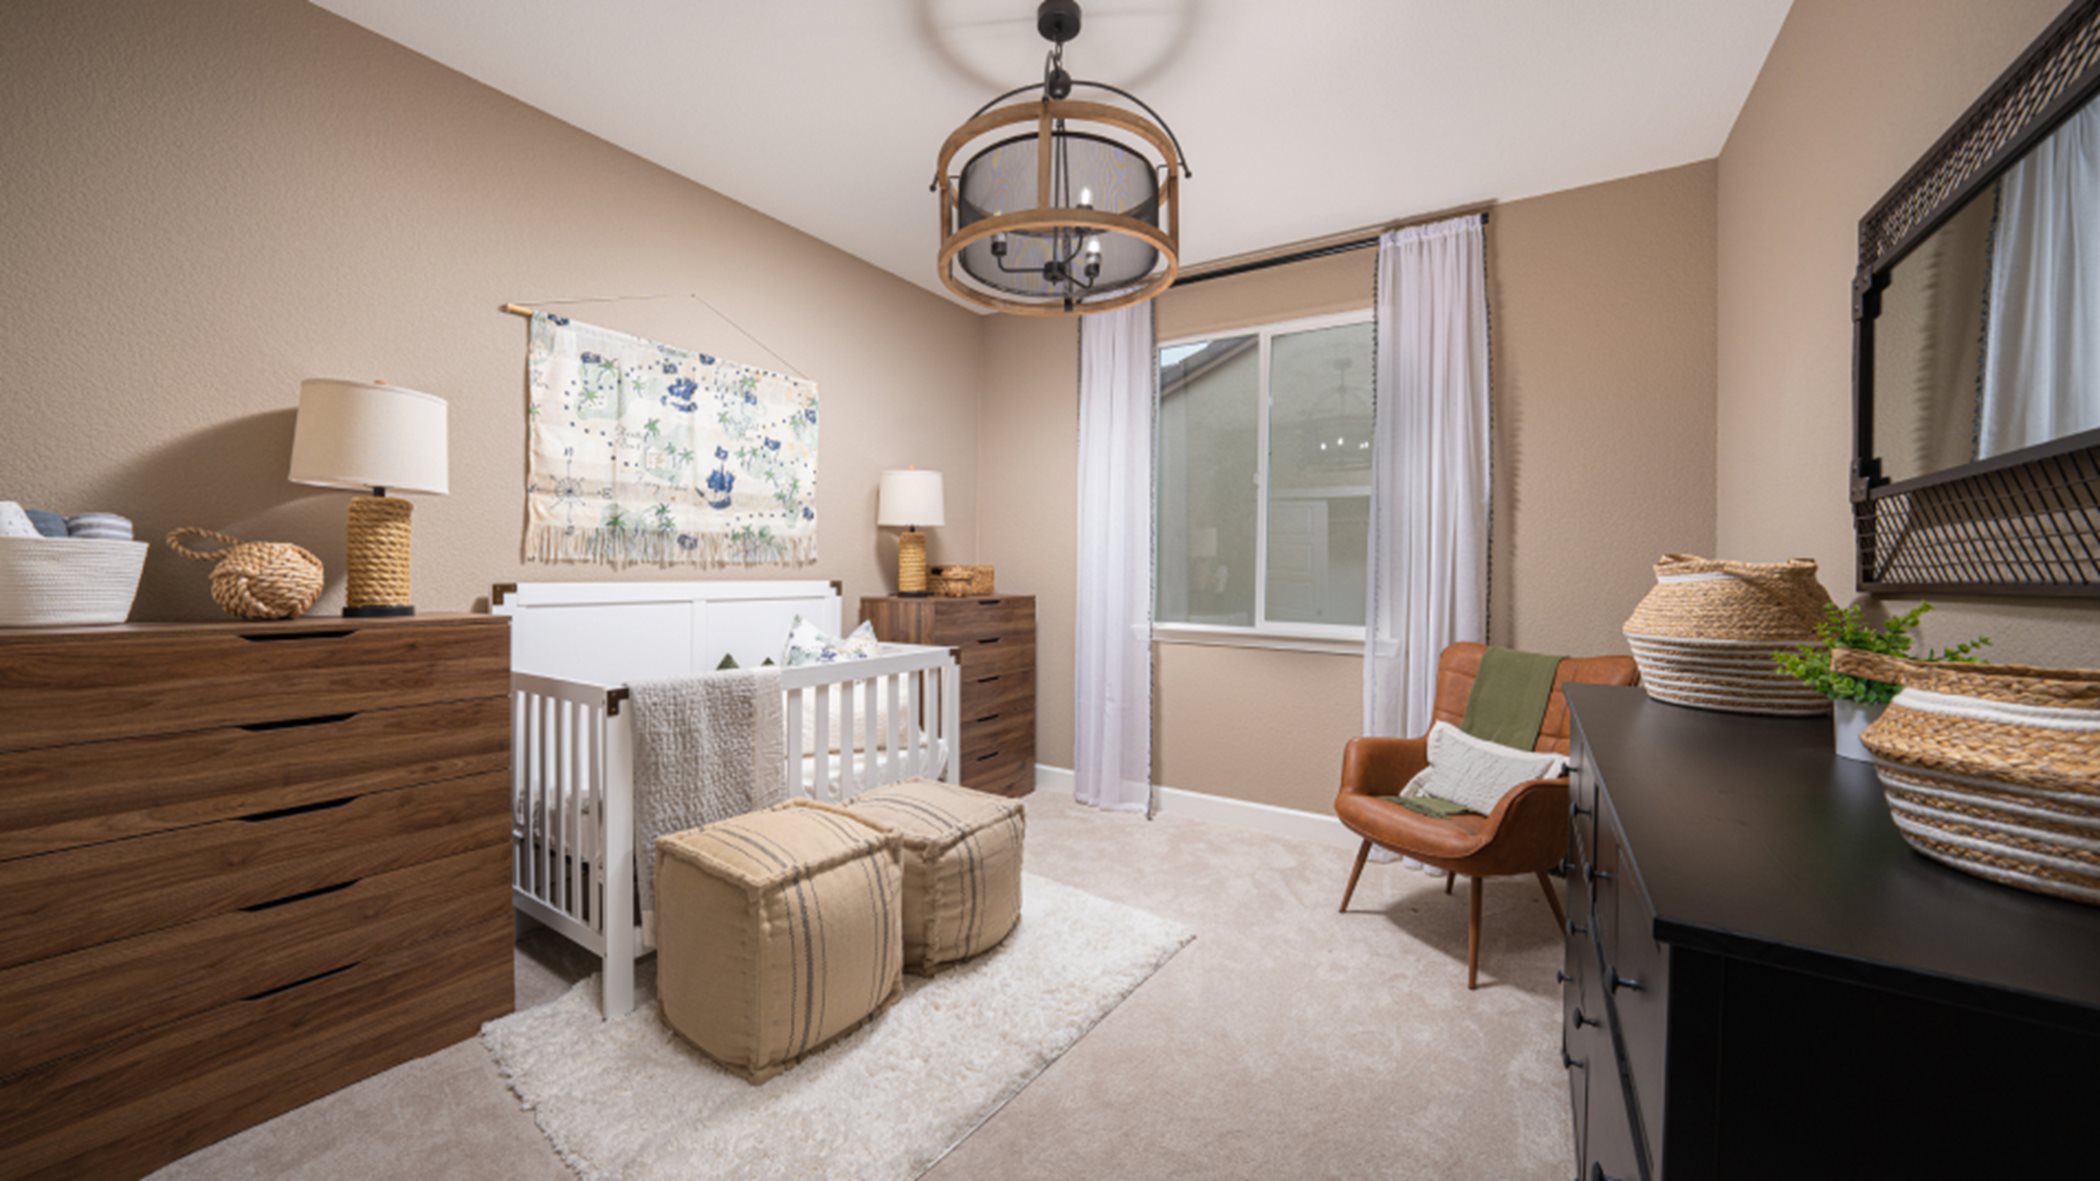 Bed3 styled as a nursery